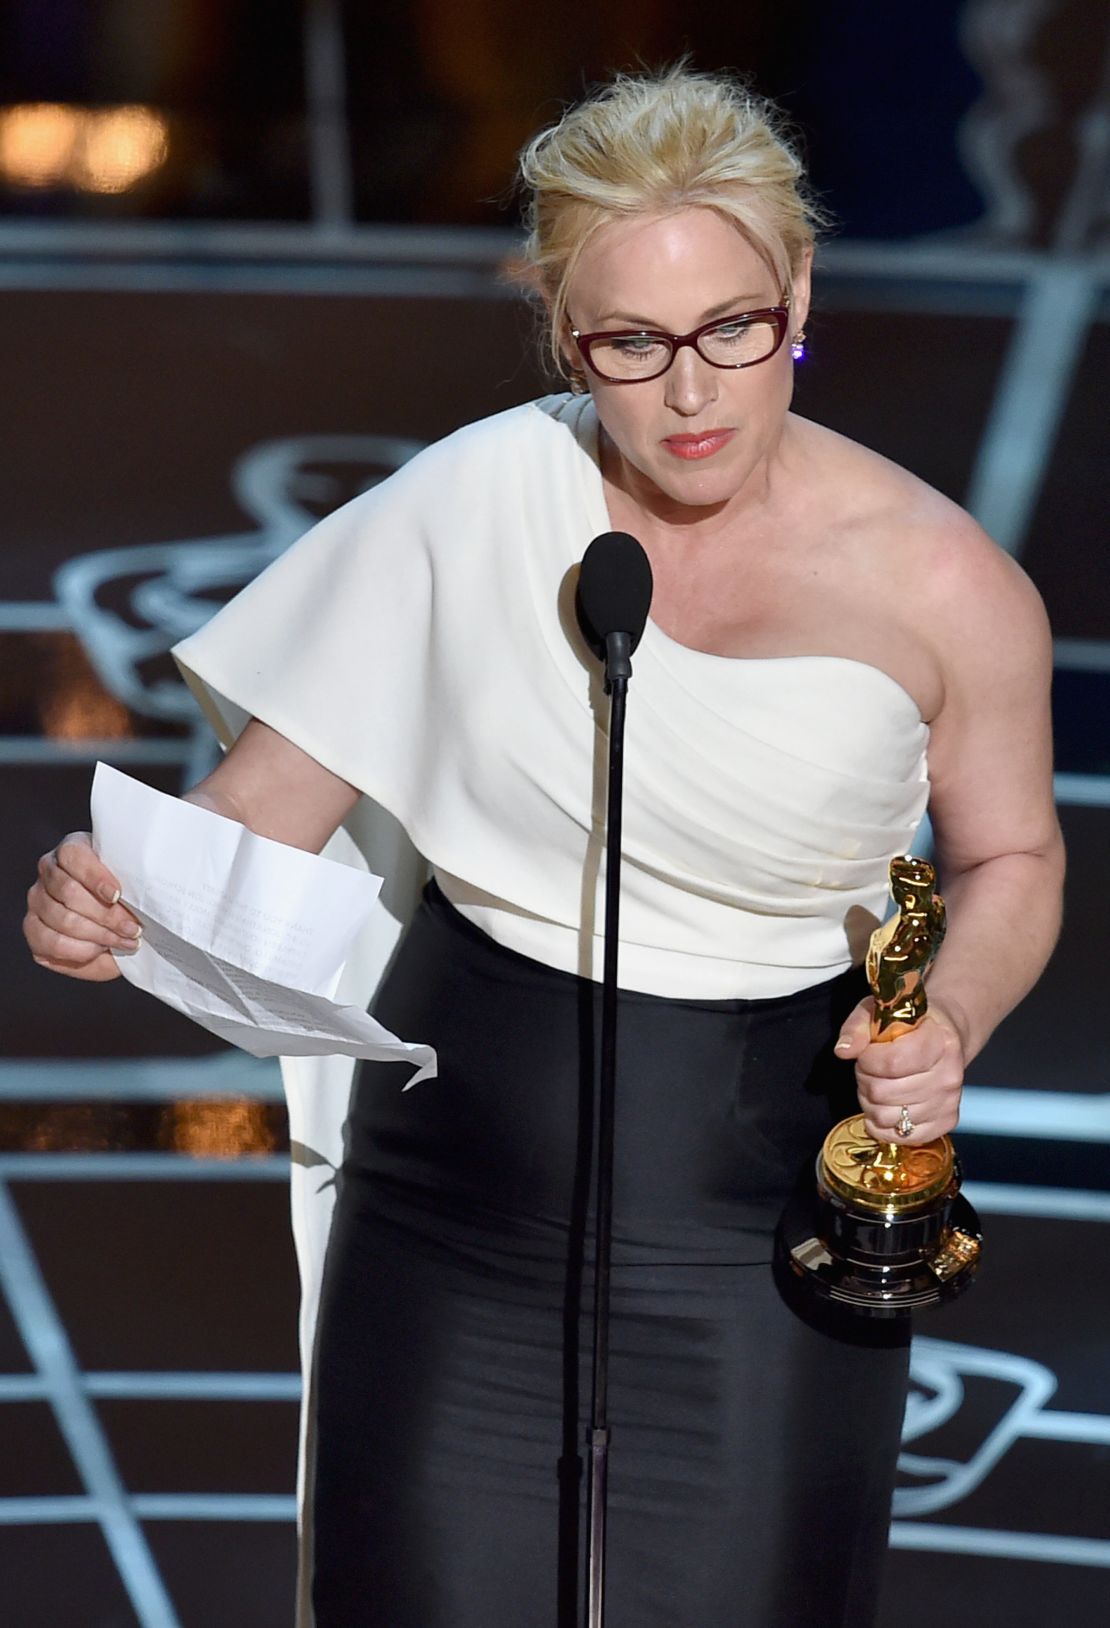 Patricia Arquette accepts the best supporting actress award at the Oscars in February.